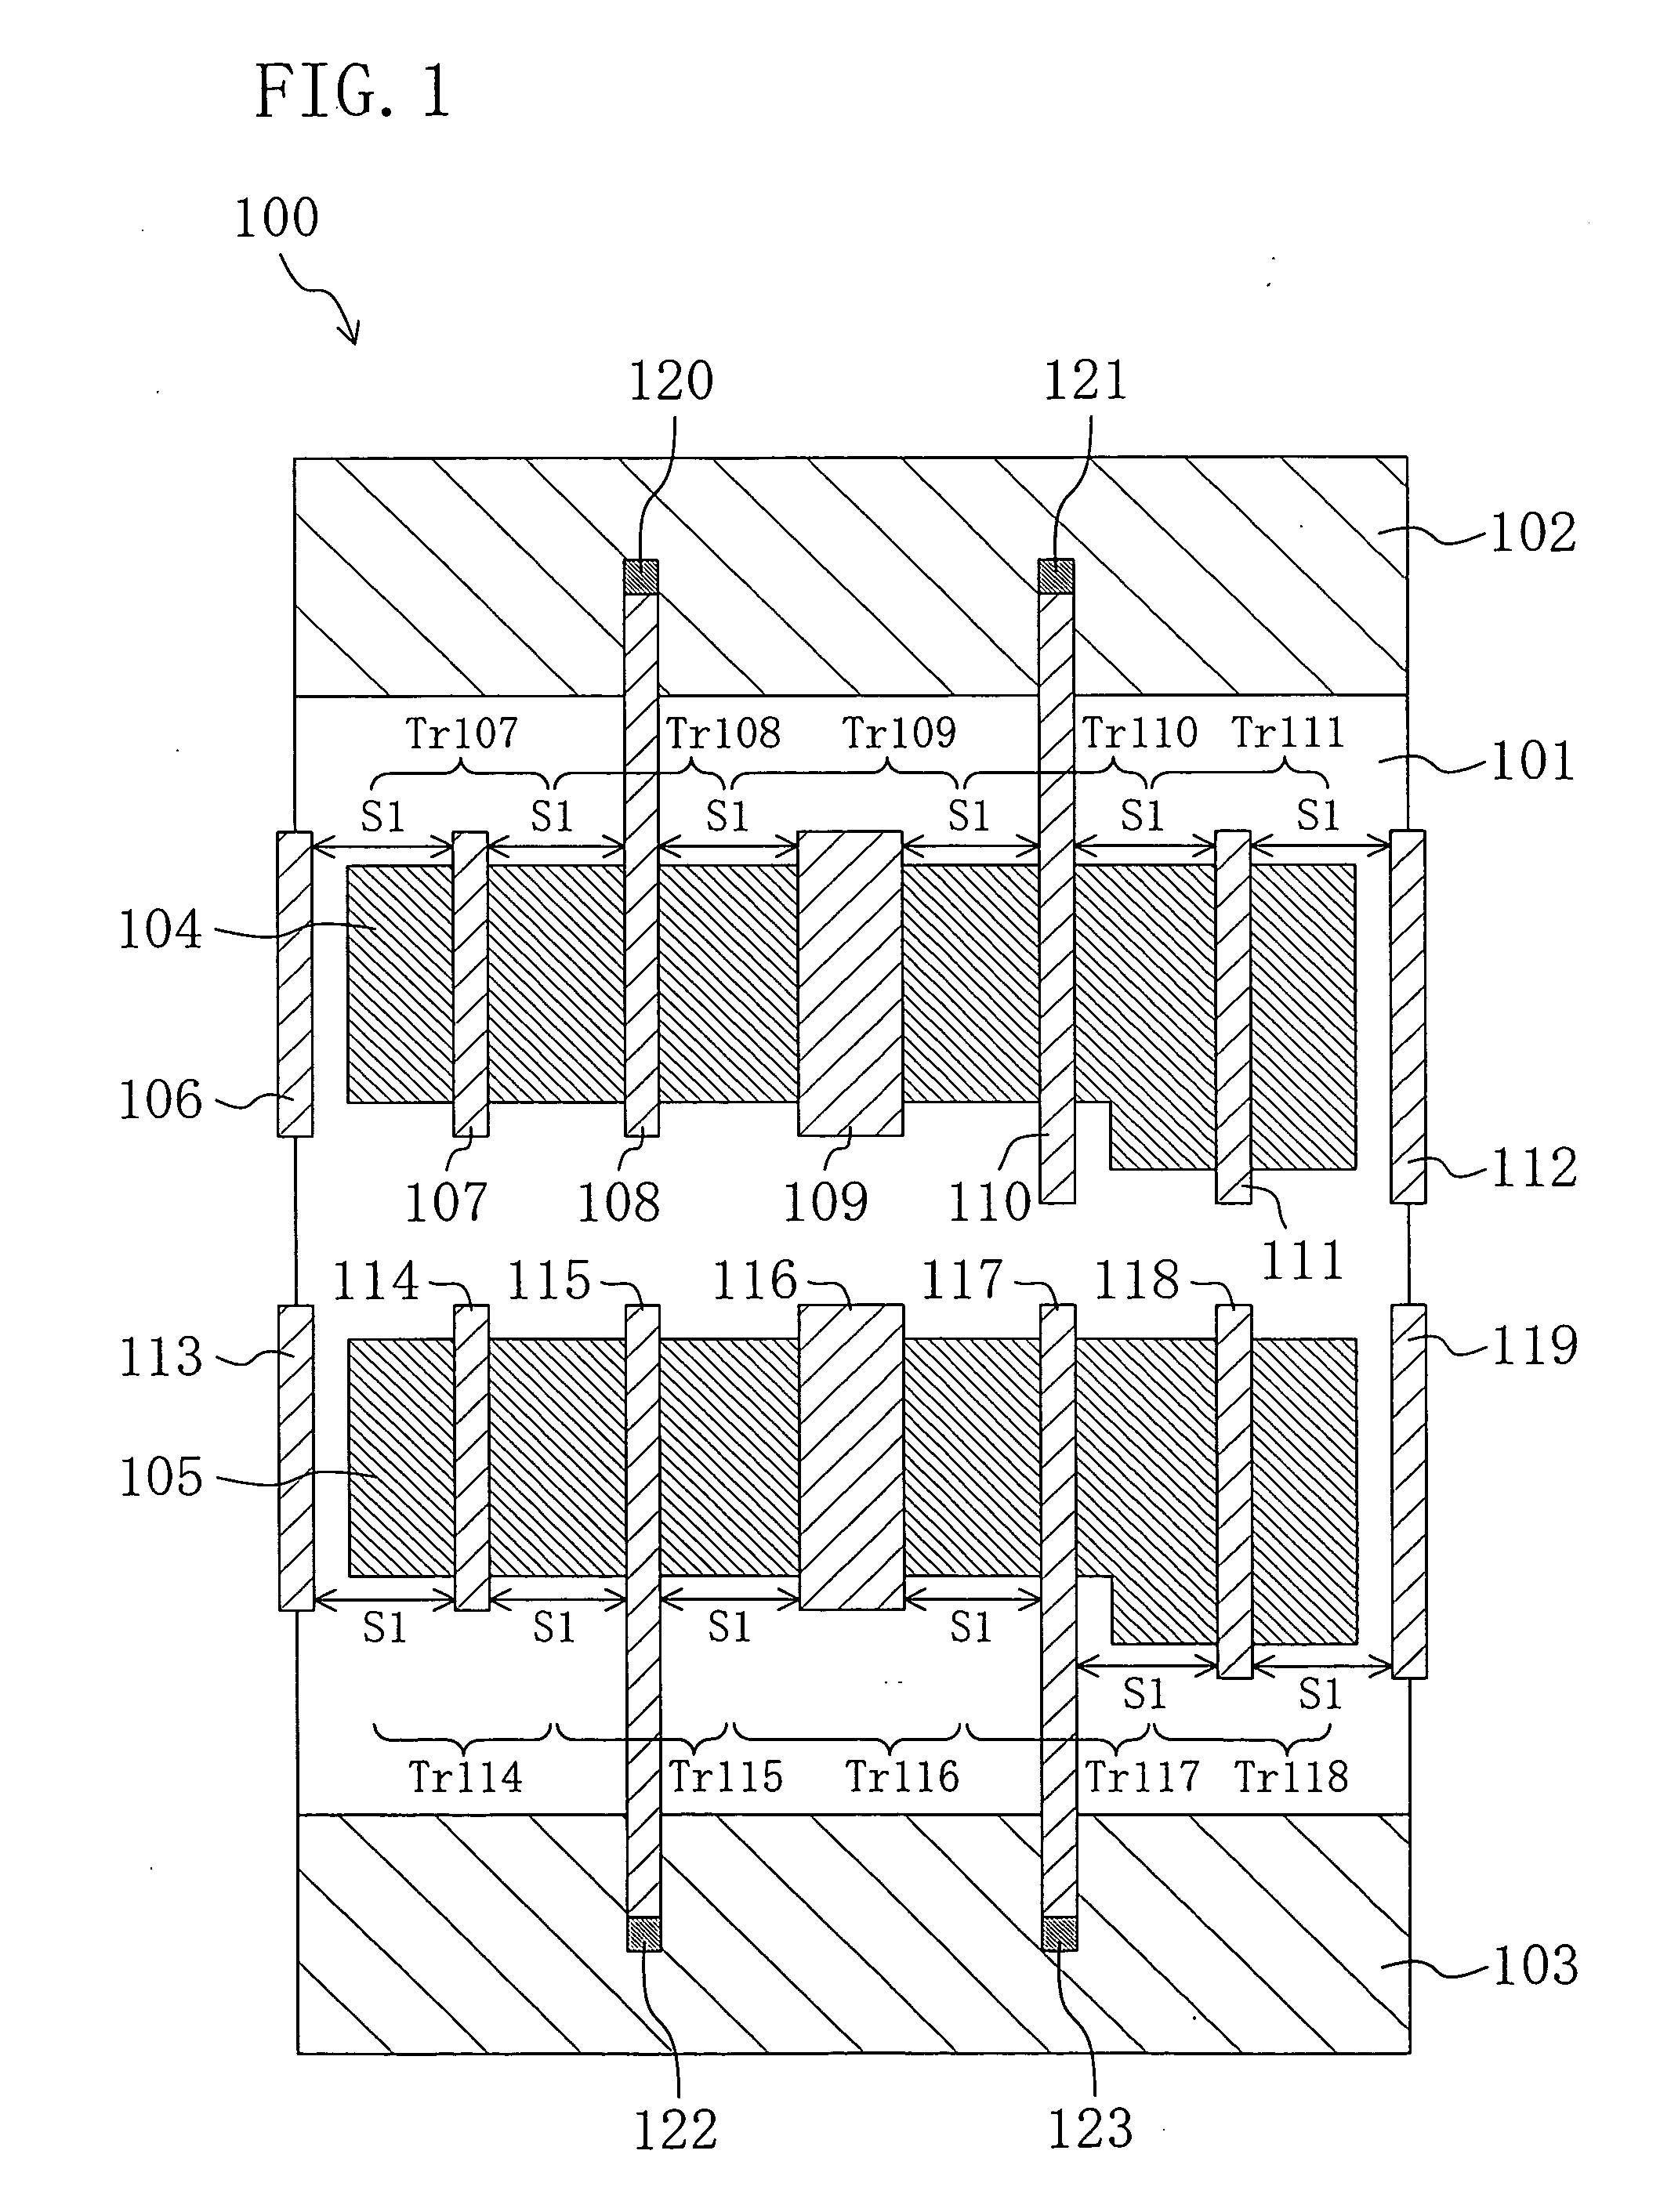 Standard cell, standard cell library, and semiconductor integrated circuit